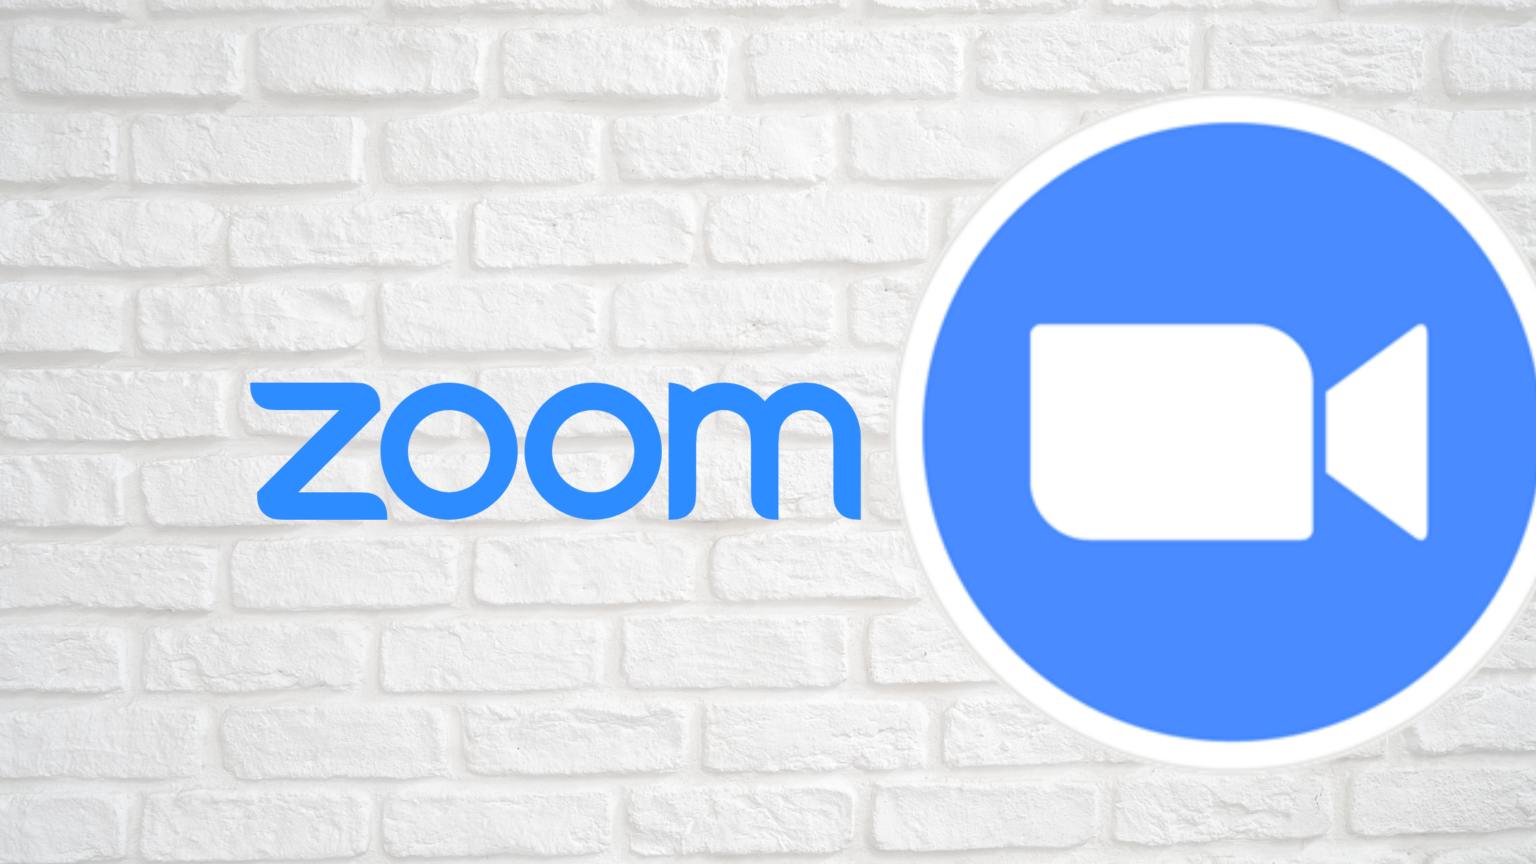 How to install Zoom on Linux